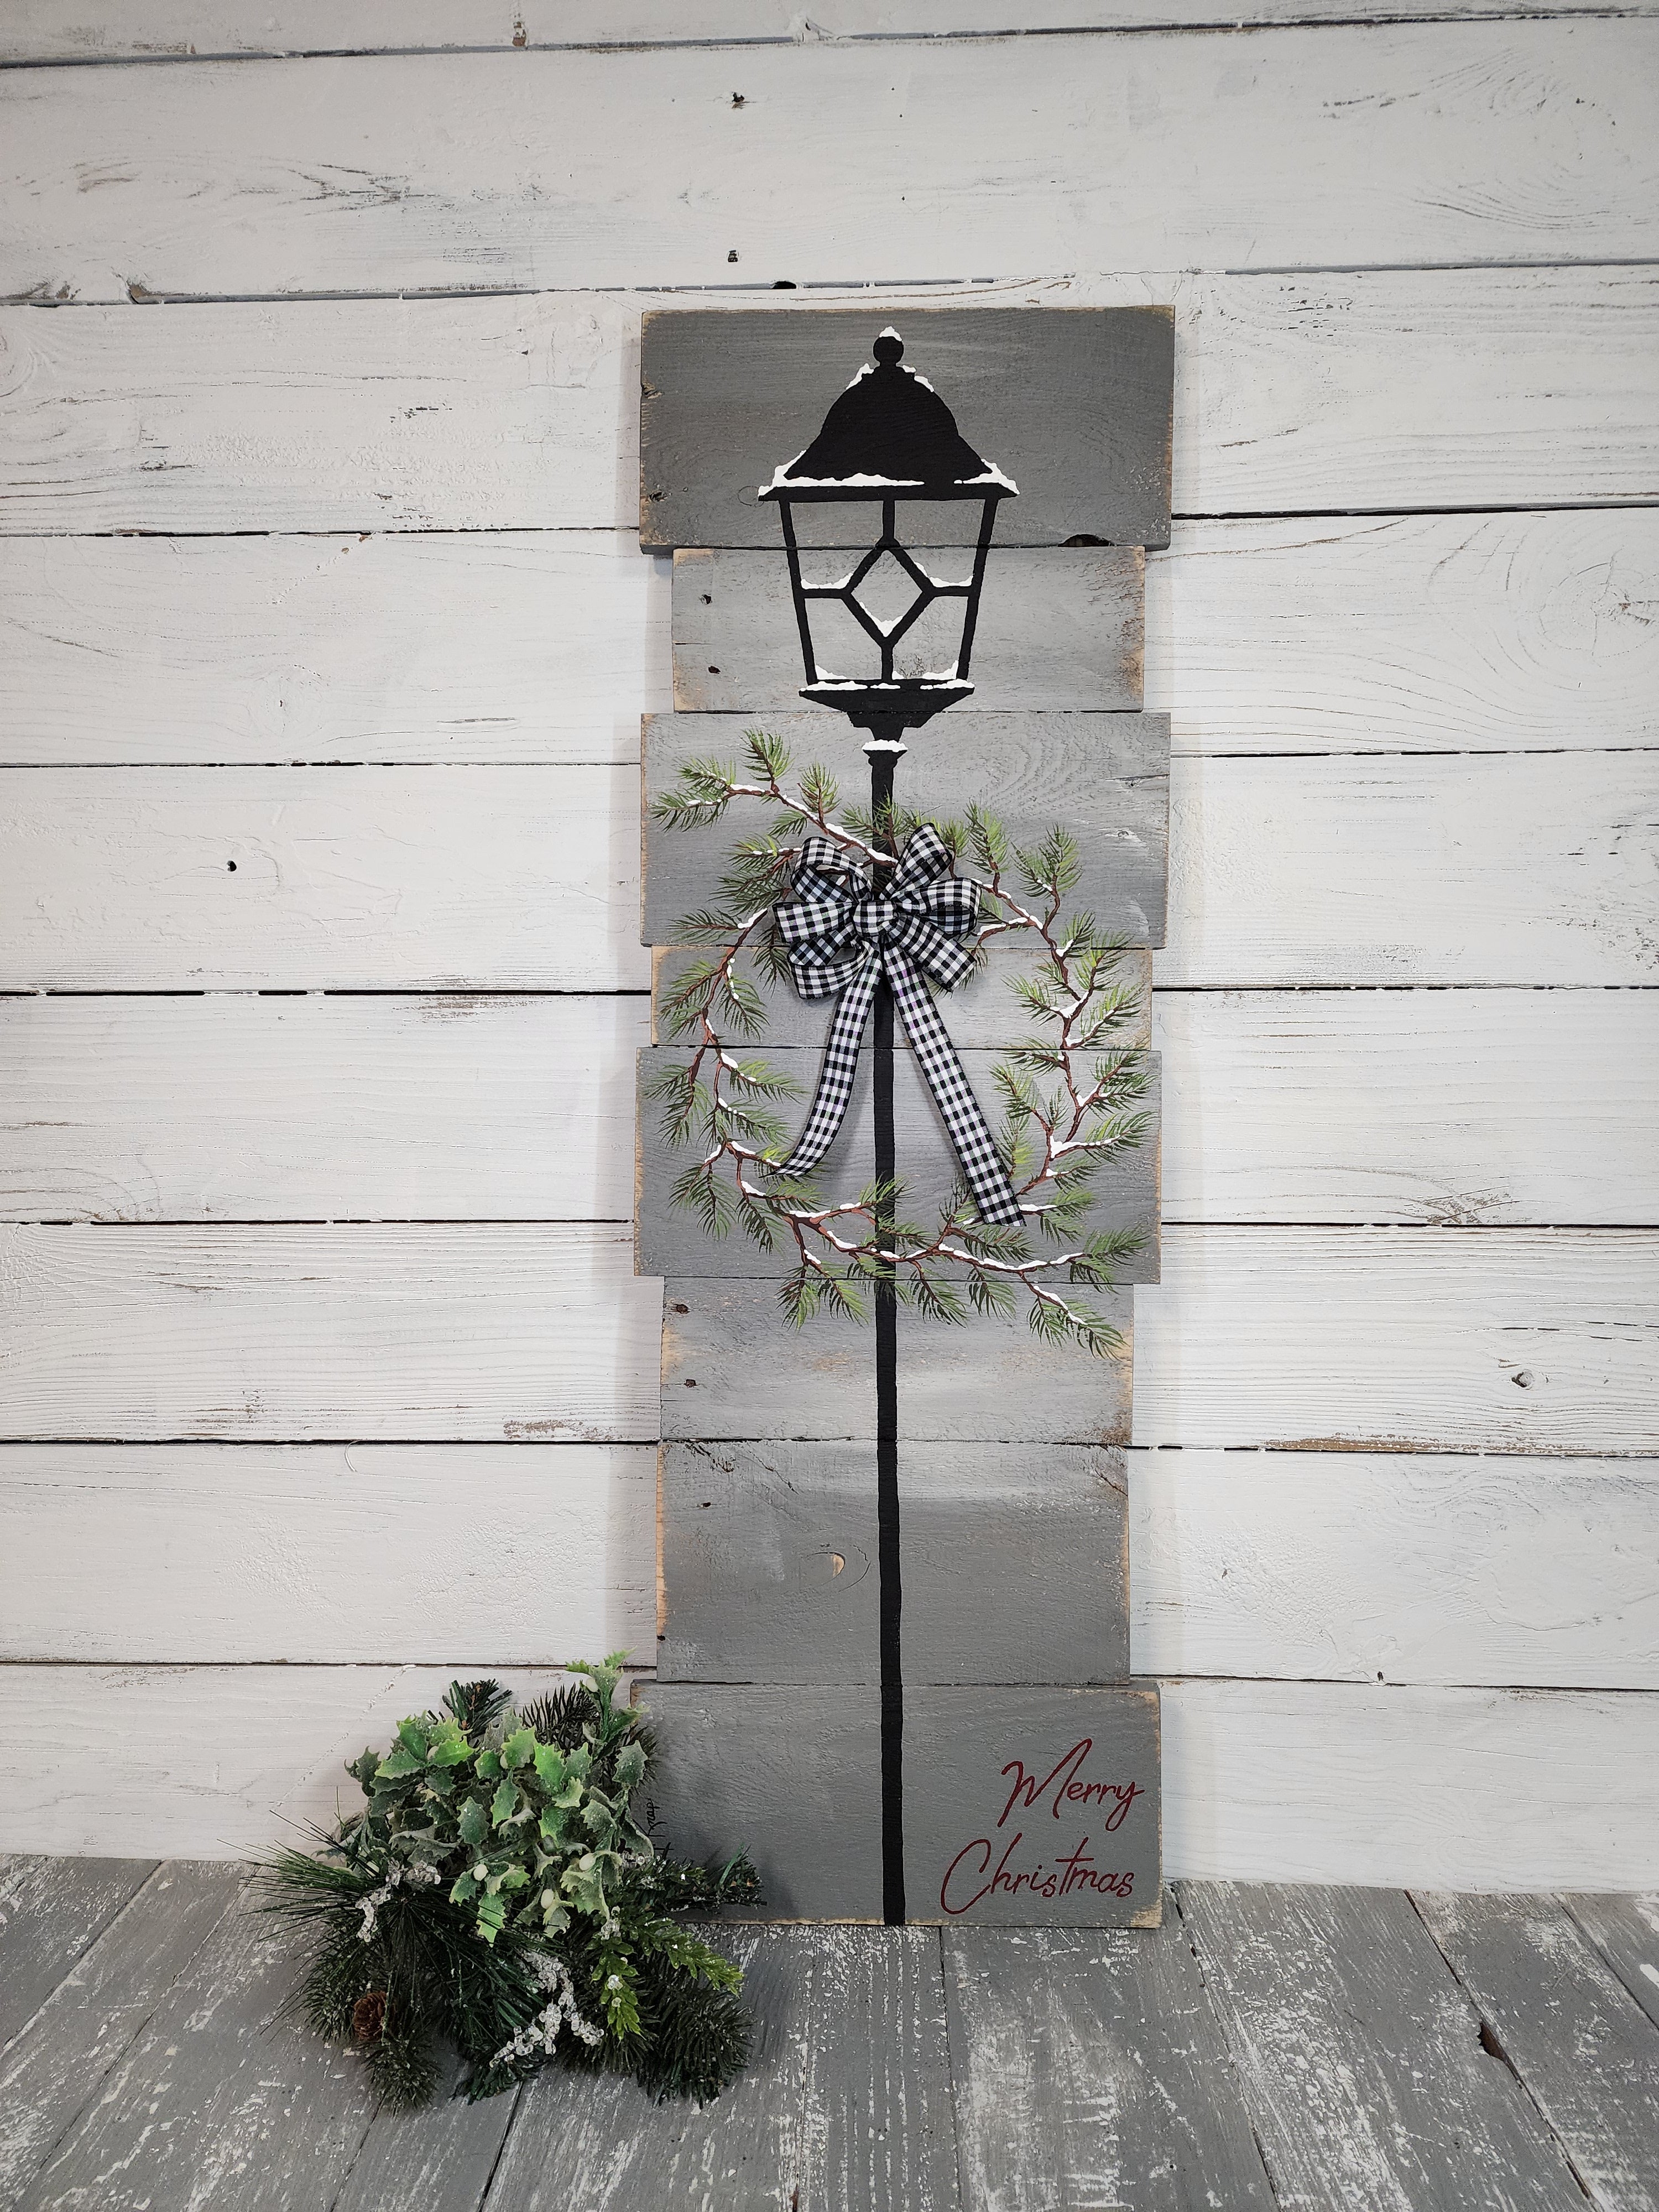 Merry Christmas pallet wood welcome sign, Hand painted pine branch wreath on lantern, buffalo plaid bow, black light pole